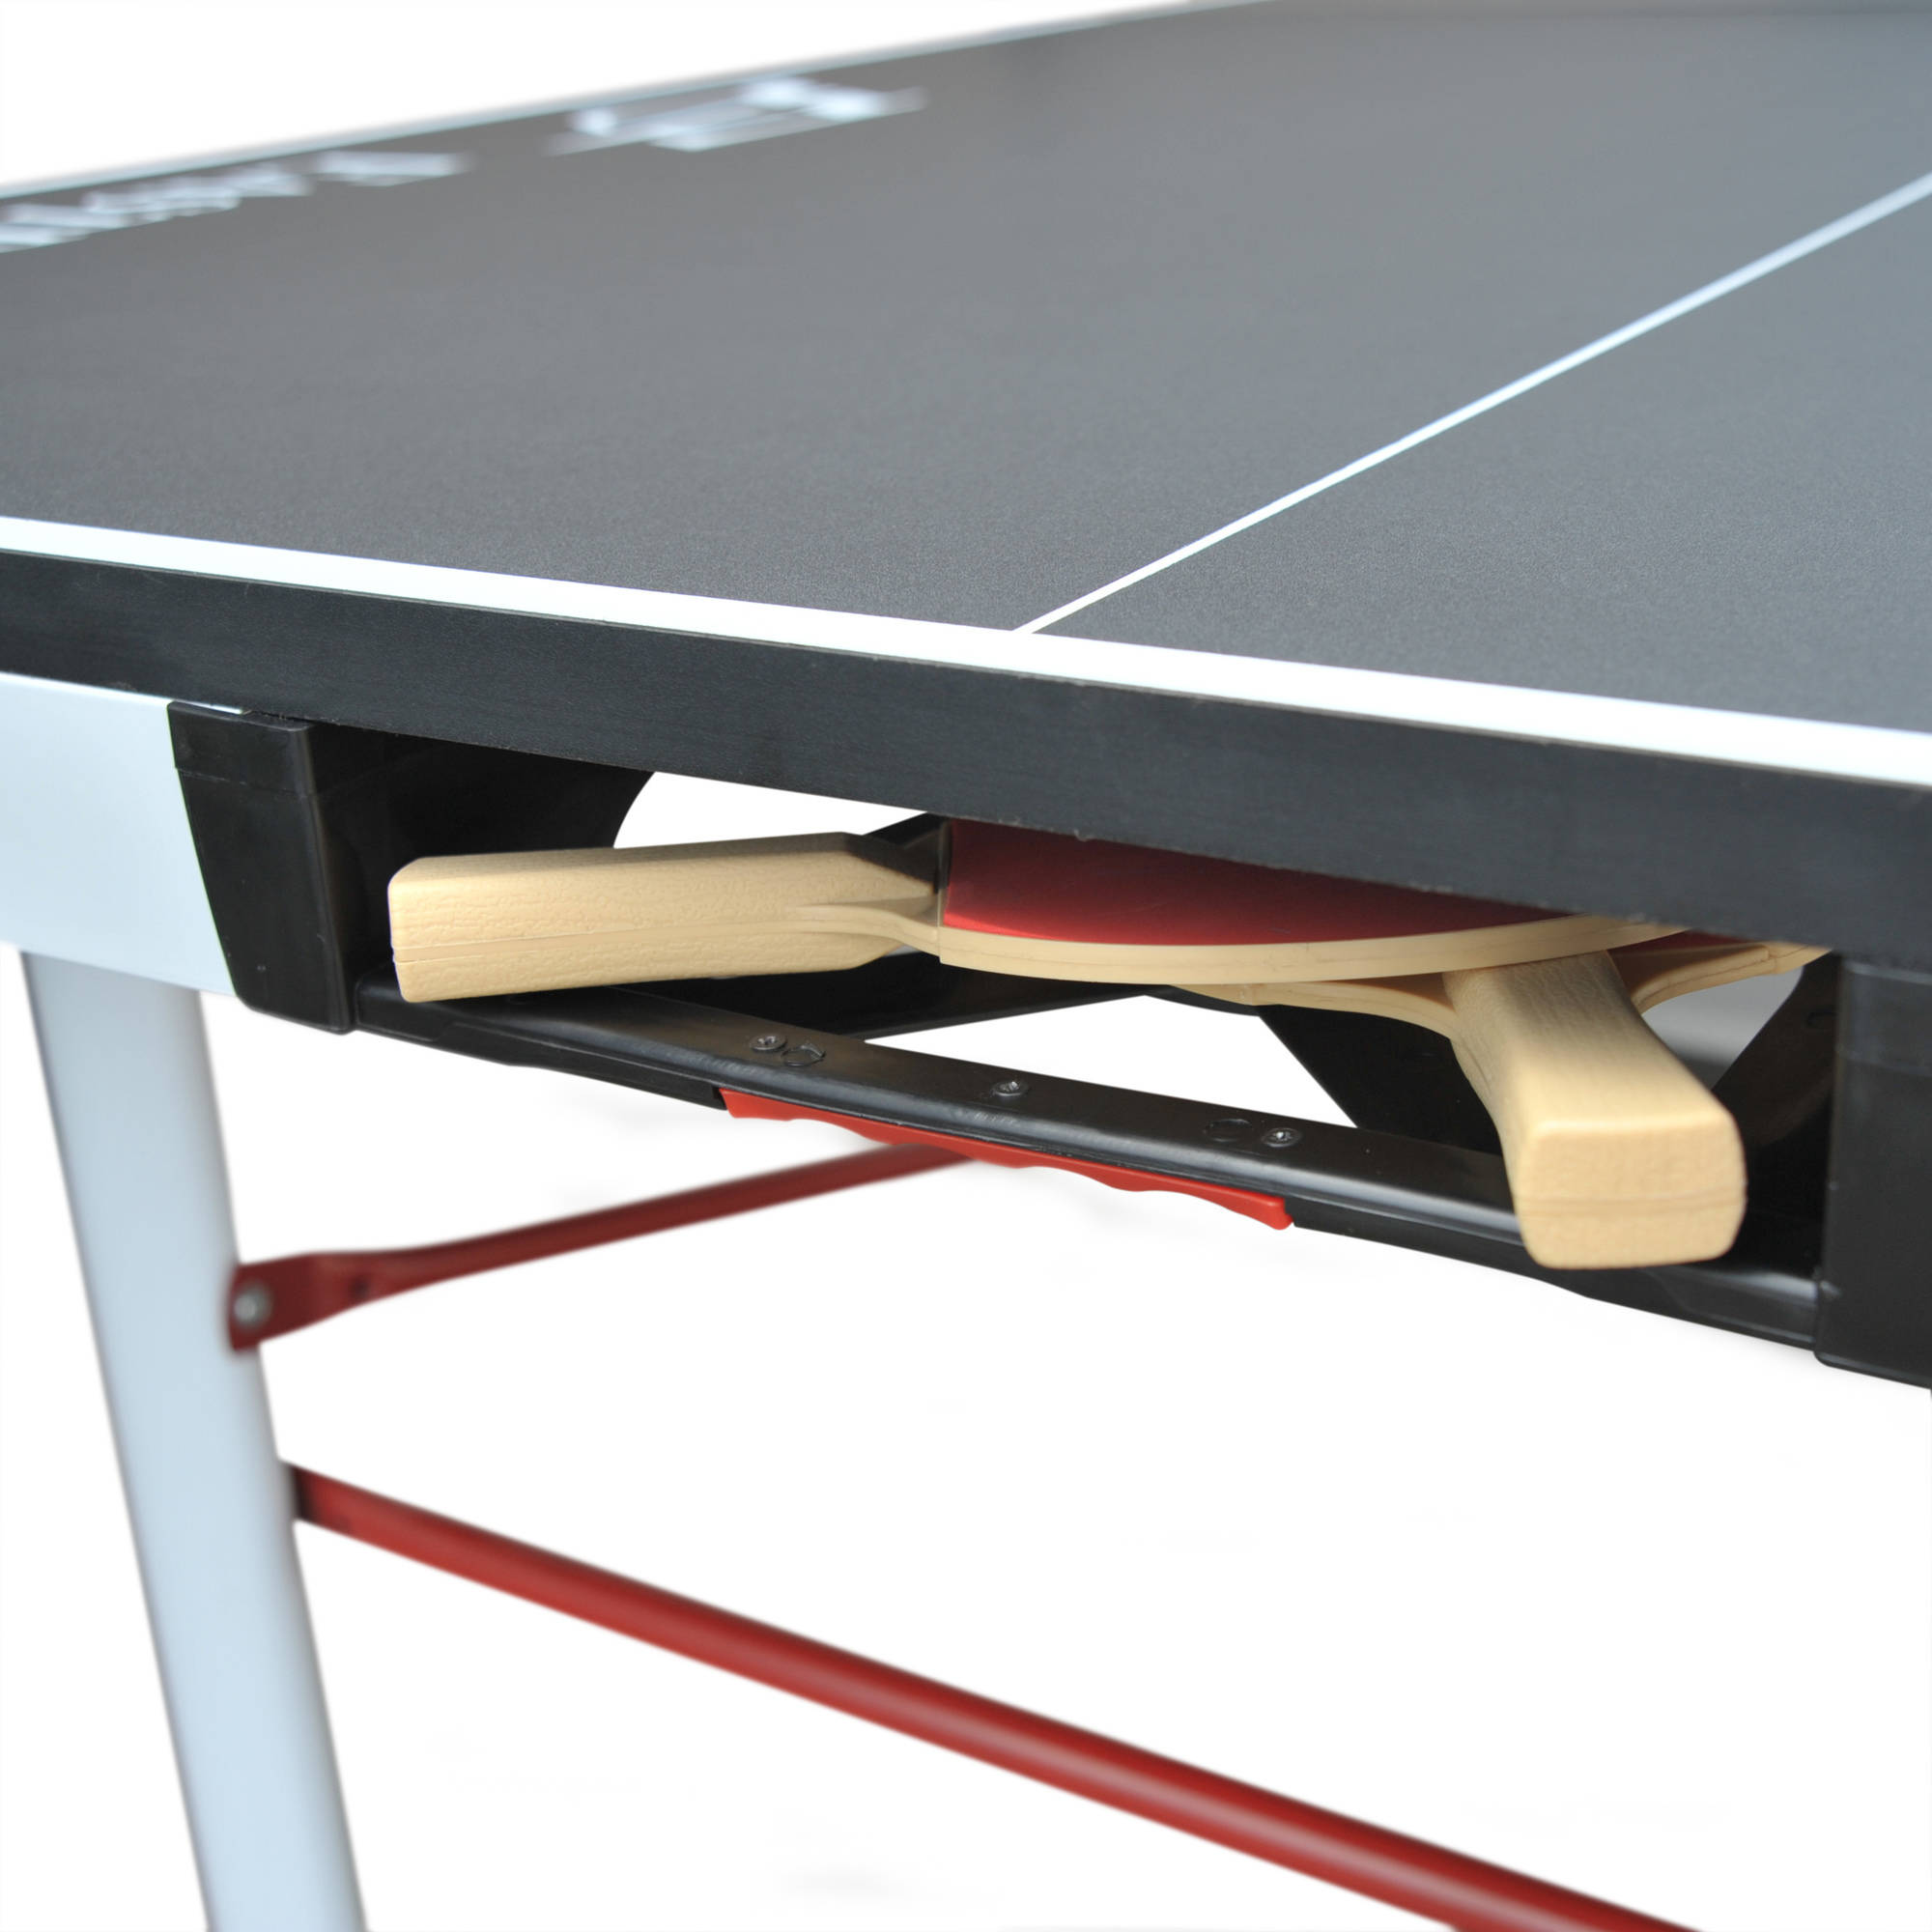 EastPoint Sports EPS 5000 2-Piece Table Tennis Table - 25mm Top - image 3 of 5